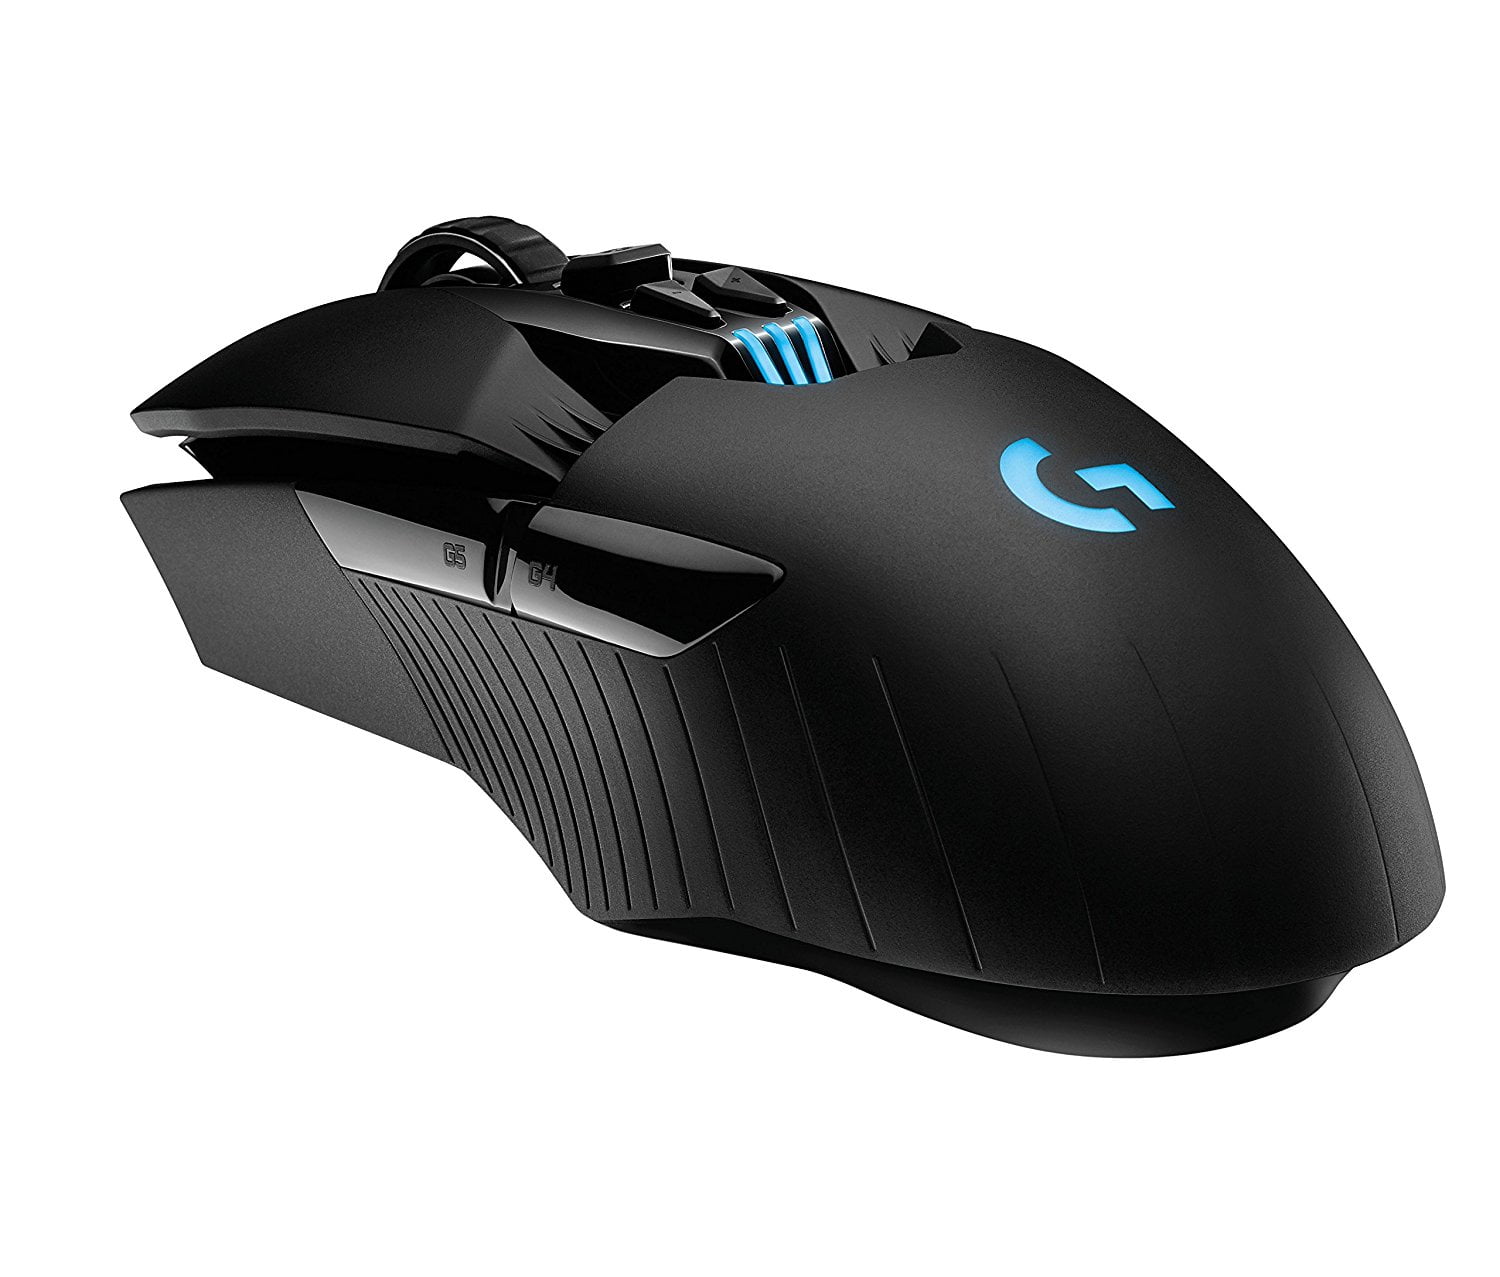 G903 Wireless Gaming Mouse Walmart.com